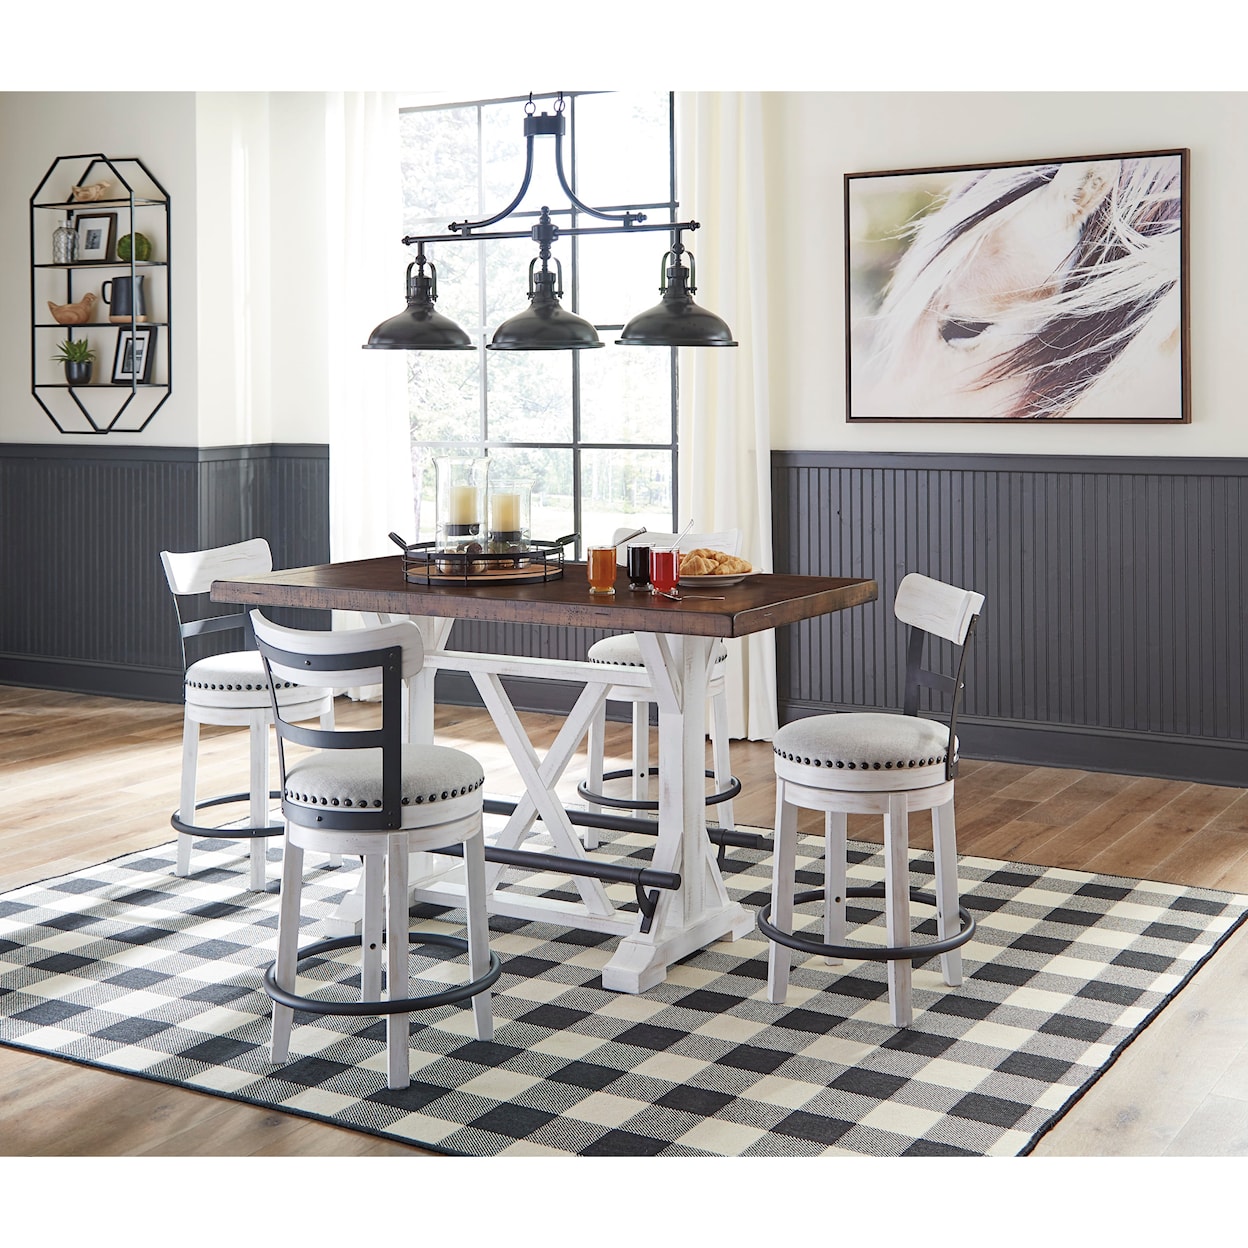 Michael Alan Select Valebeck Counter Height Dining Table and 2 Barstools